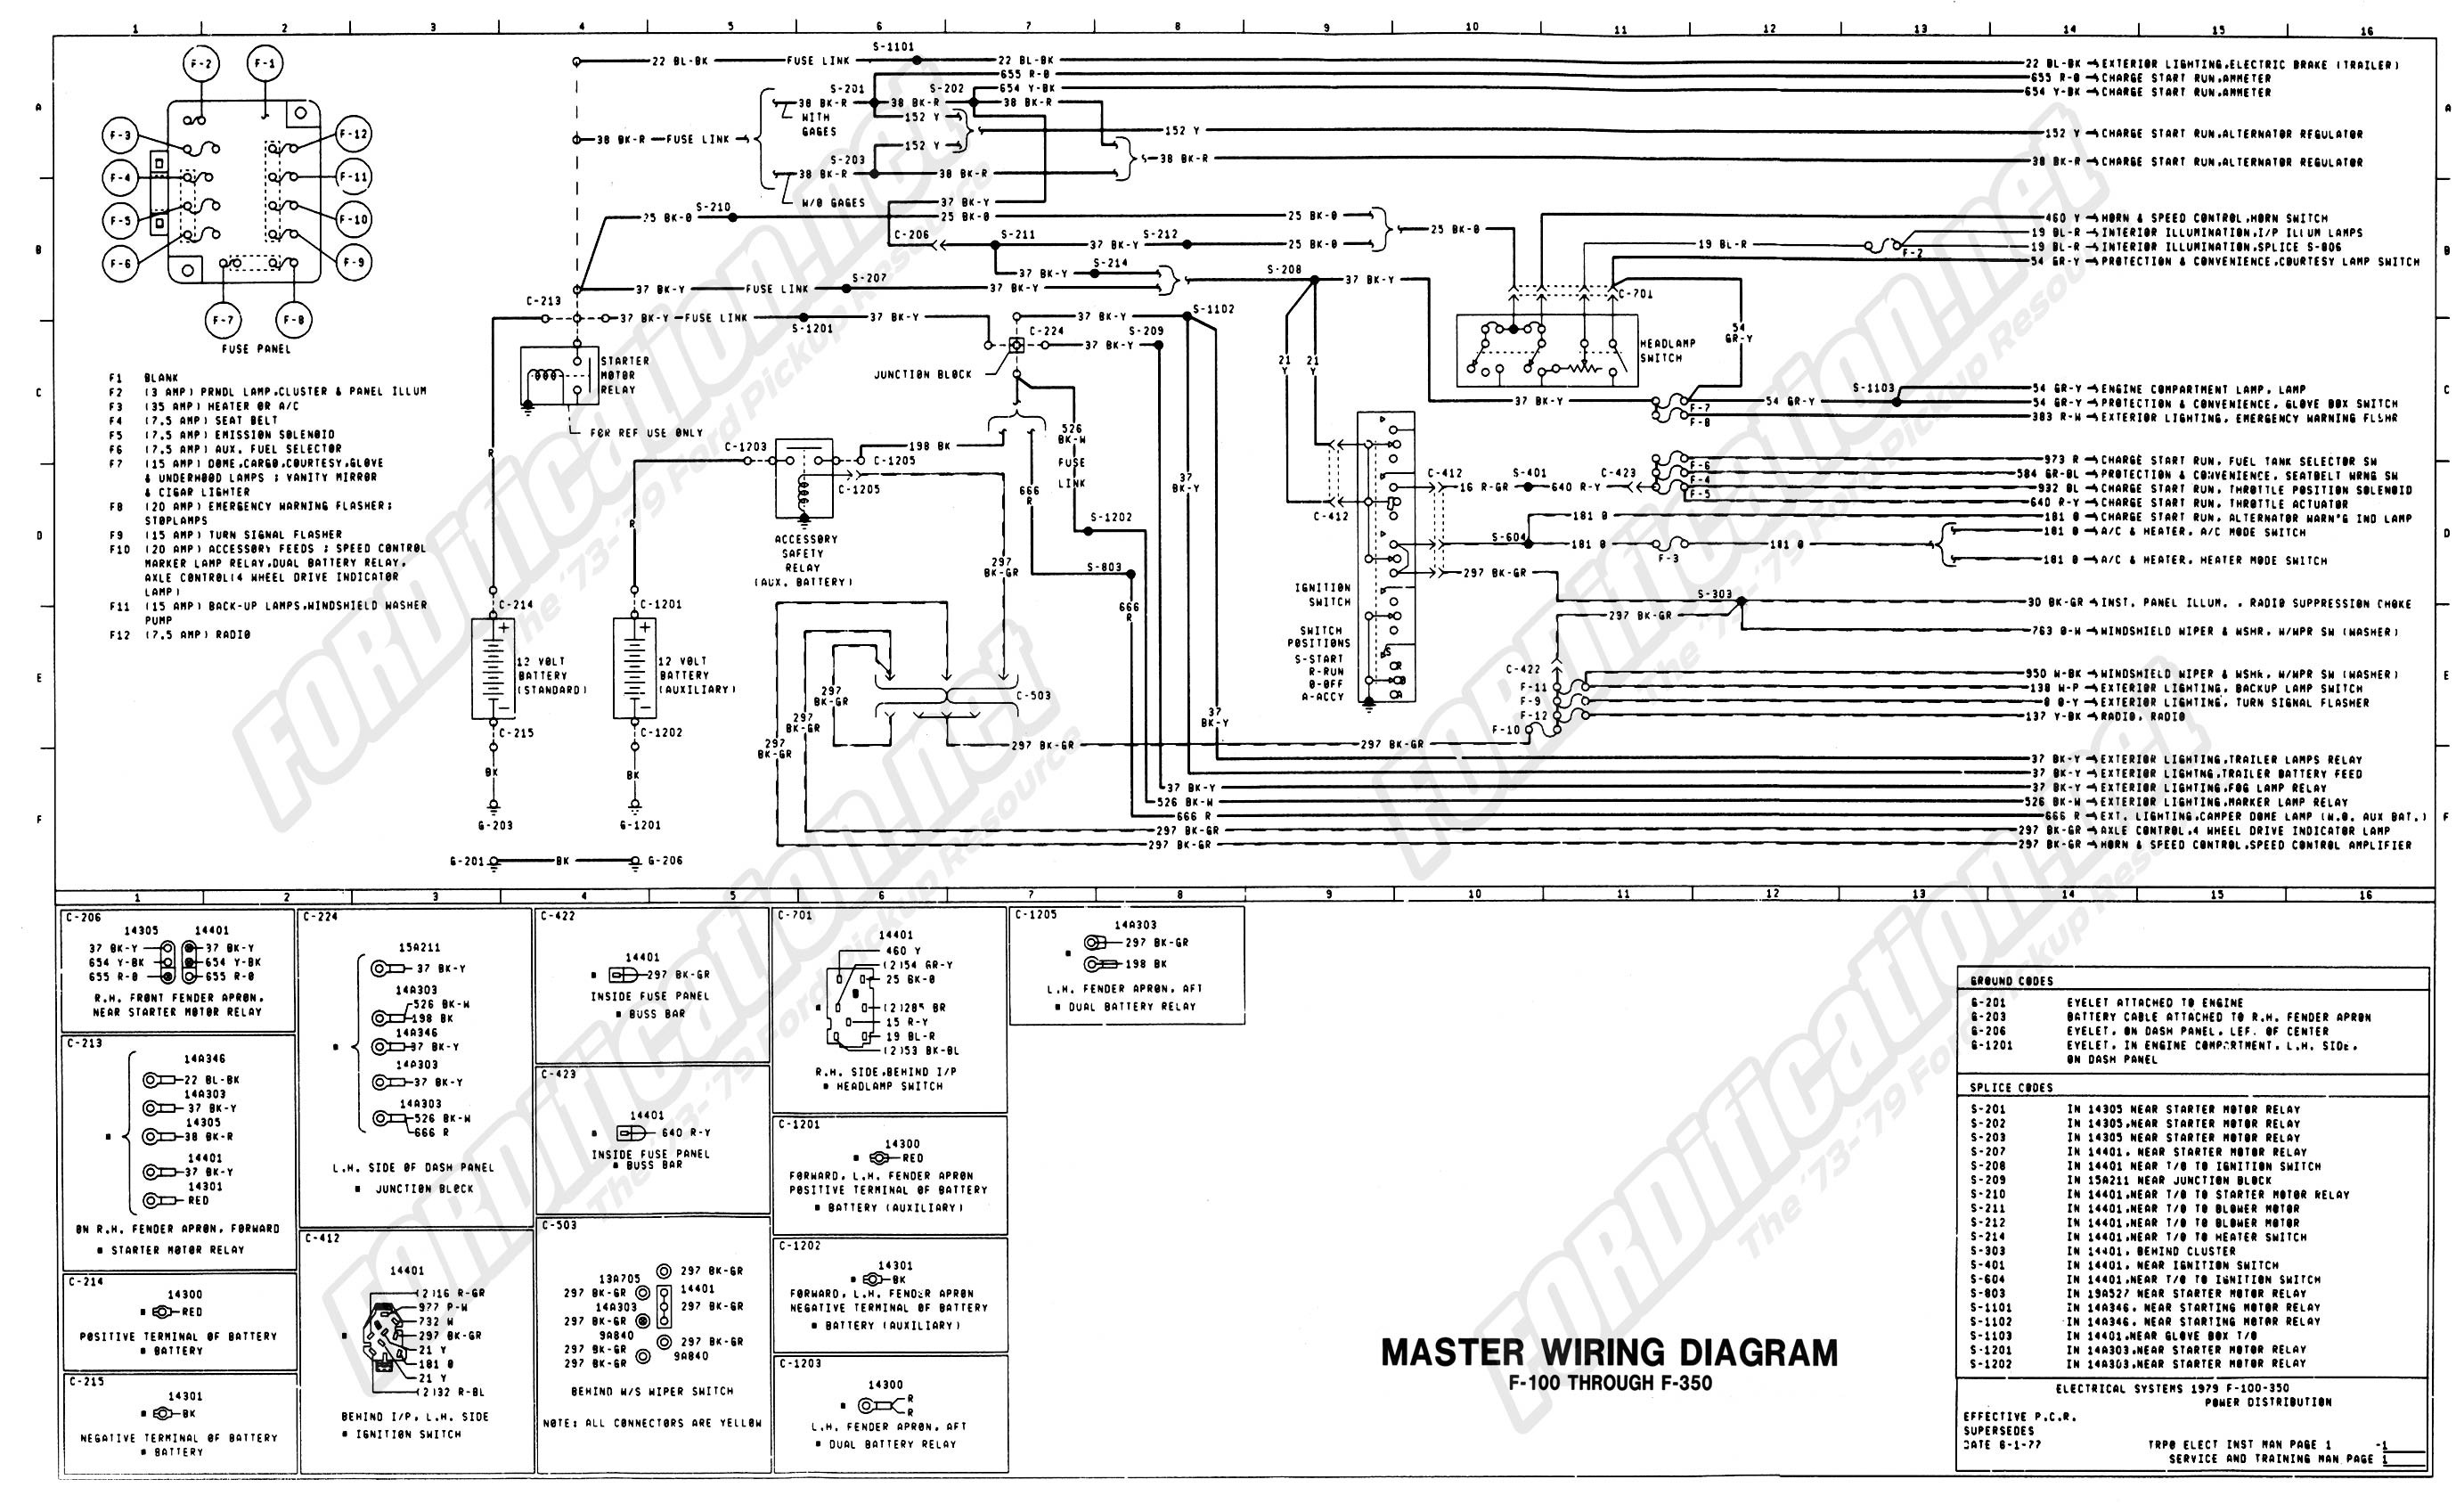 Ford F-150 Power Window Motor Wiring Diagram from mainetreasurechest.com